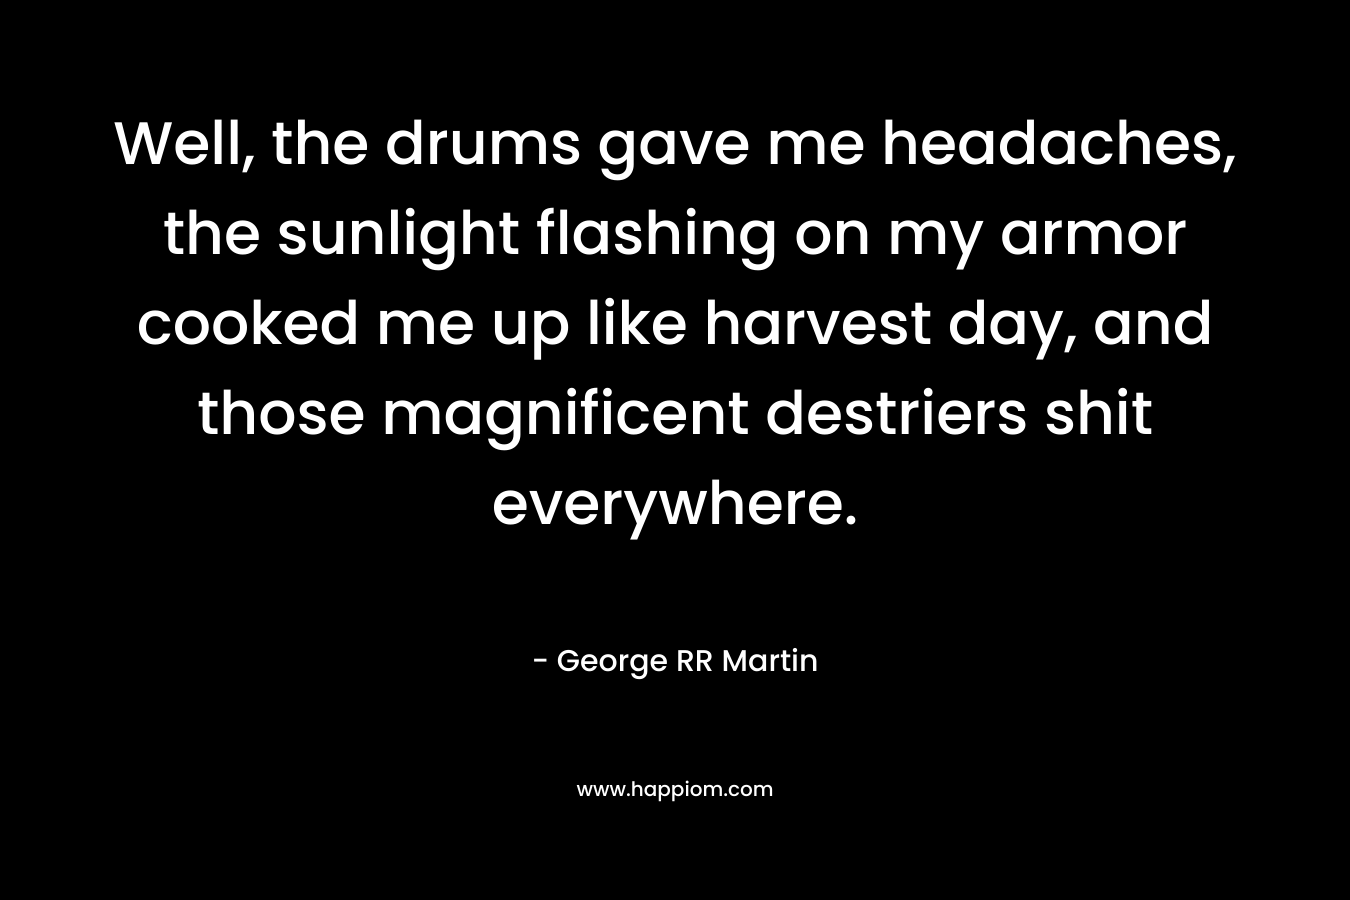 Well, the drums gave me headaches, the sunlight flashing on my armor cooked me up like harvest day, and those magnificent destriers shit everywhere. – George RR Martin